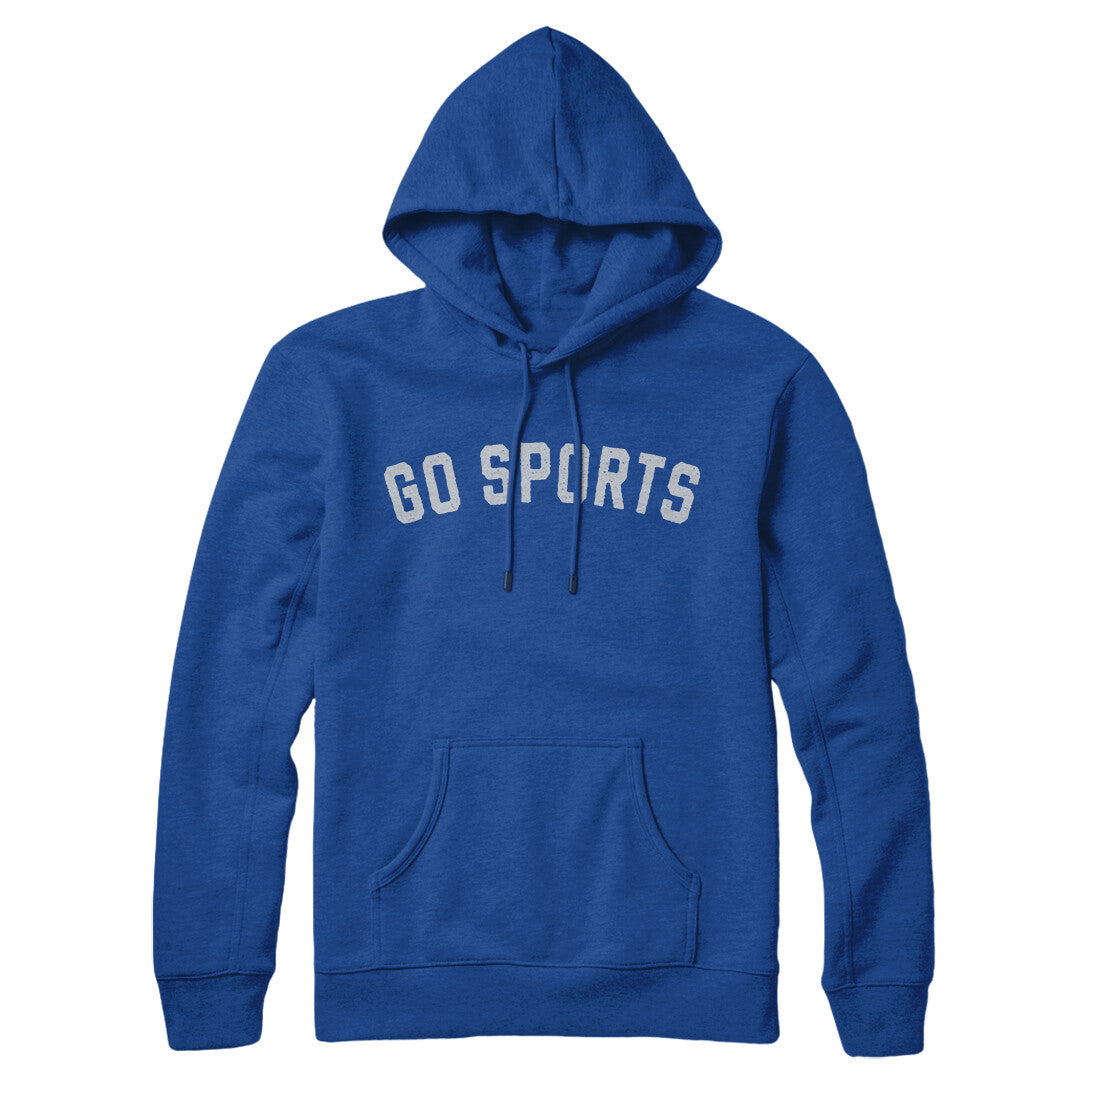 Go Sports in True Royal Color